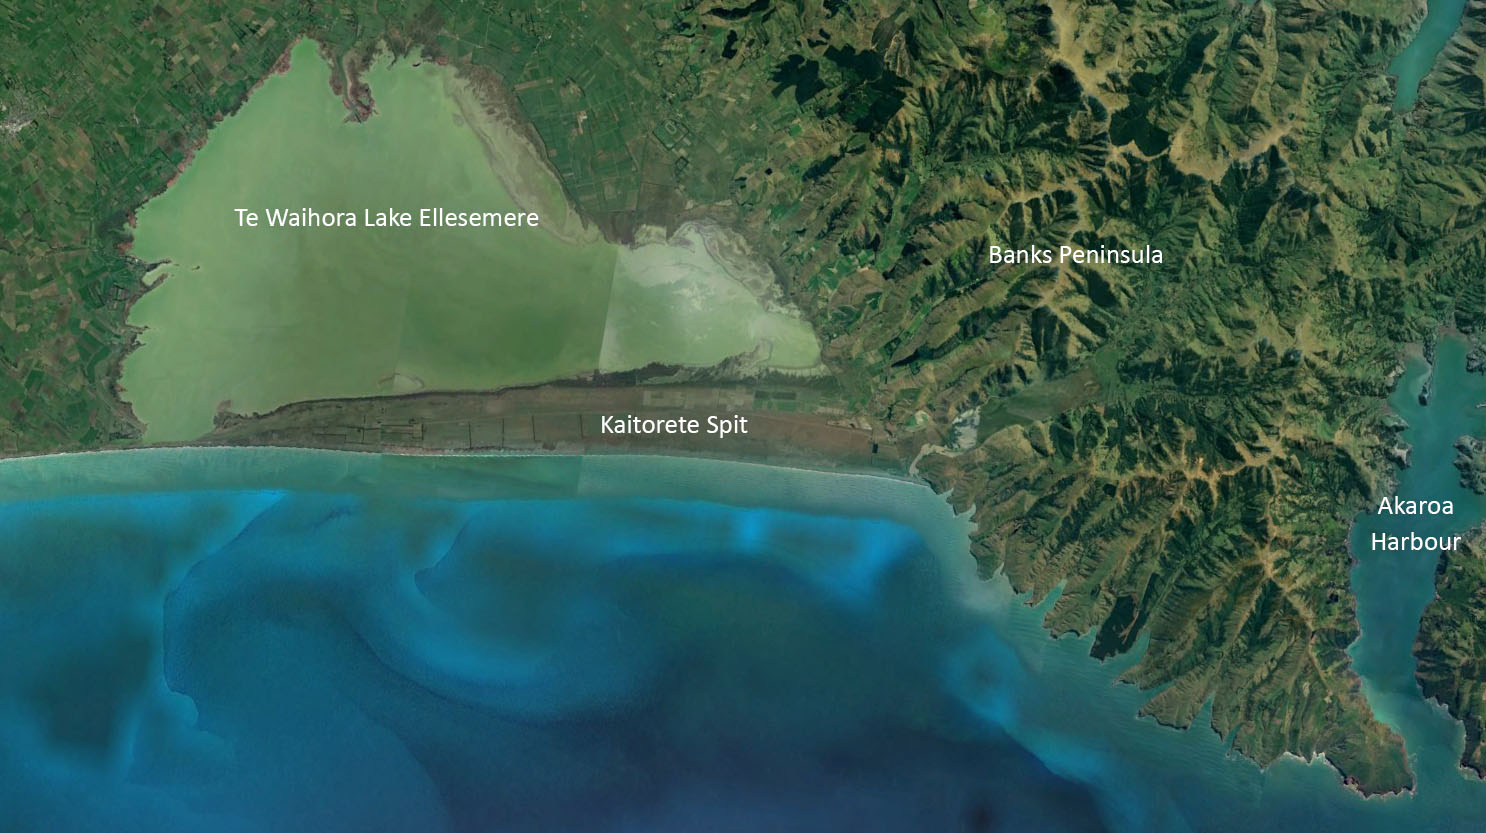 Fig. 3 Kaitorete Spit (Image: Google Earth)